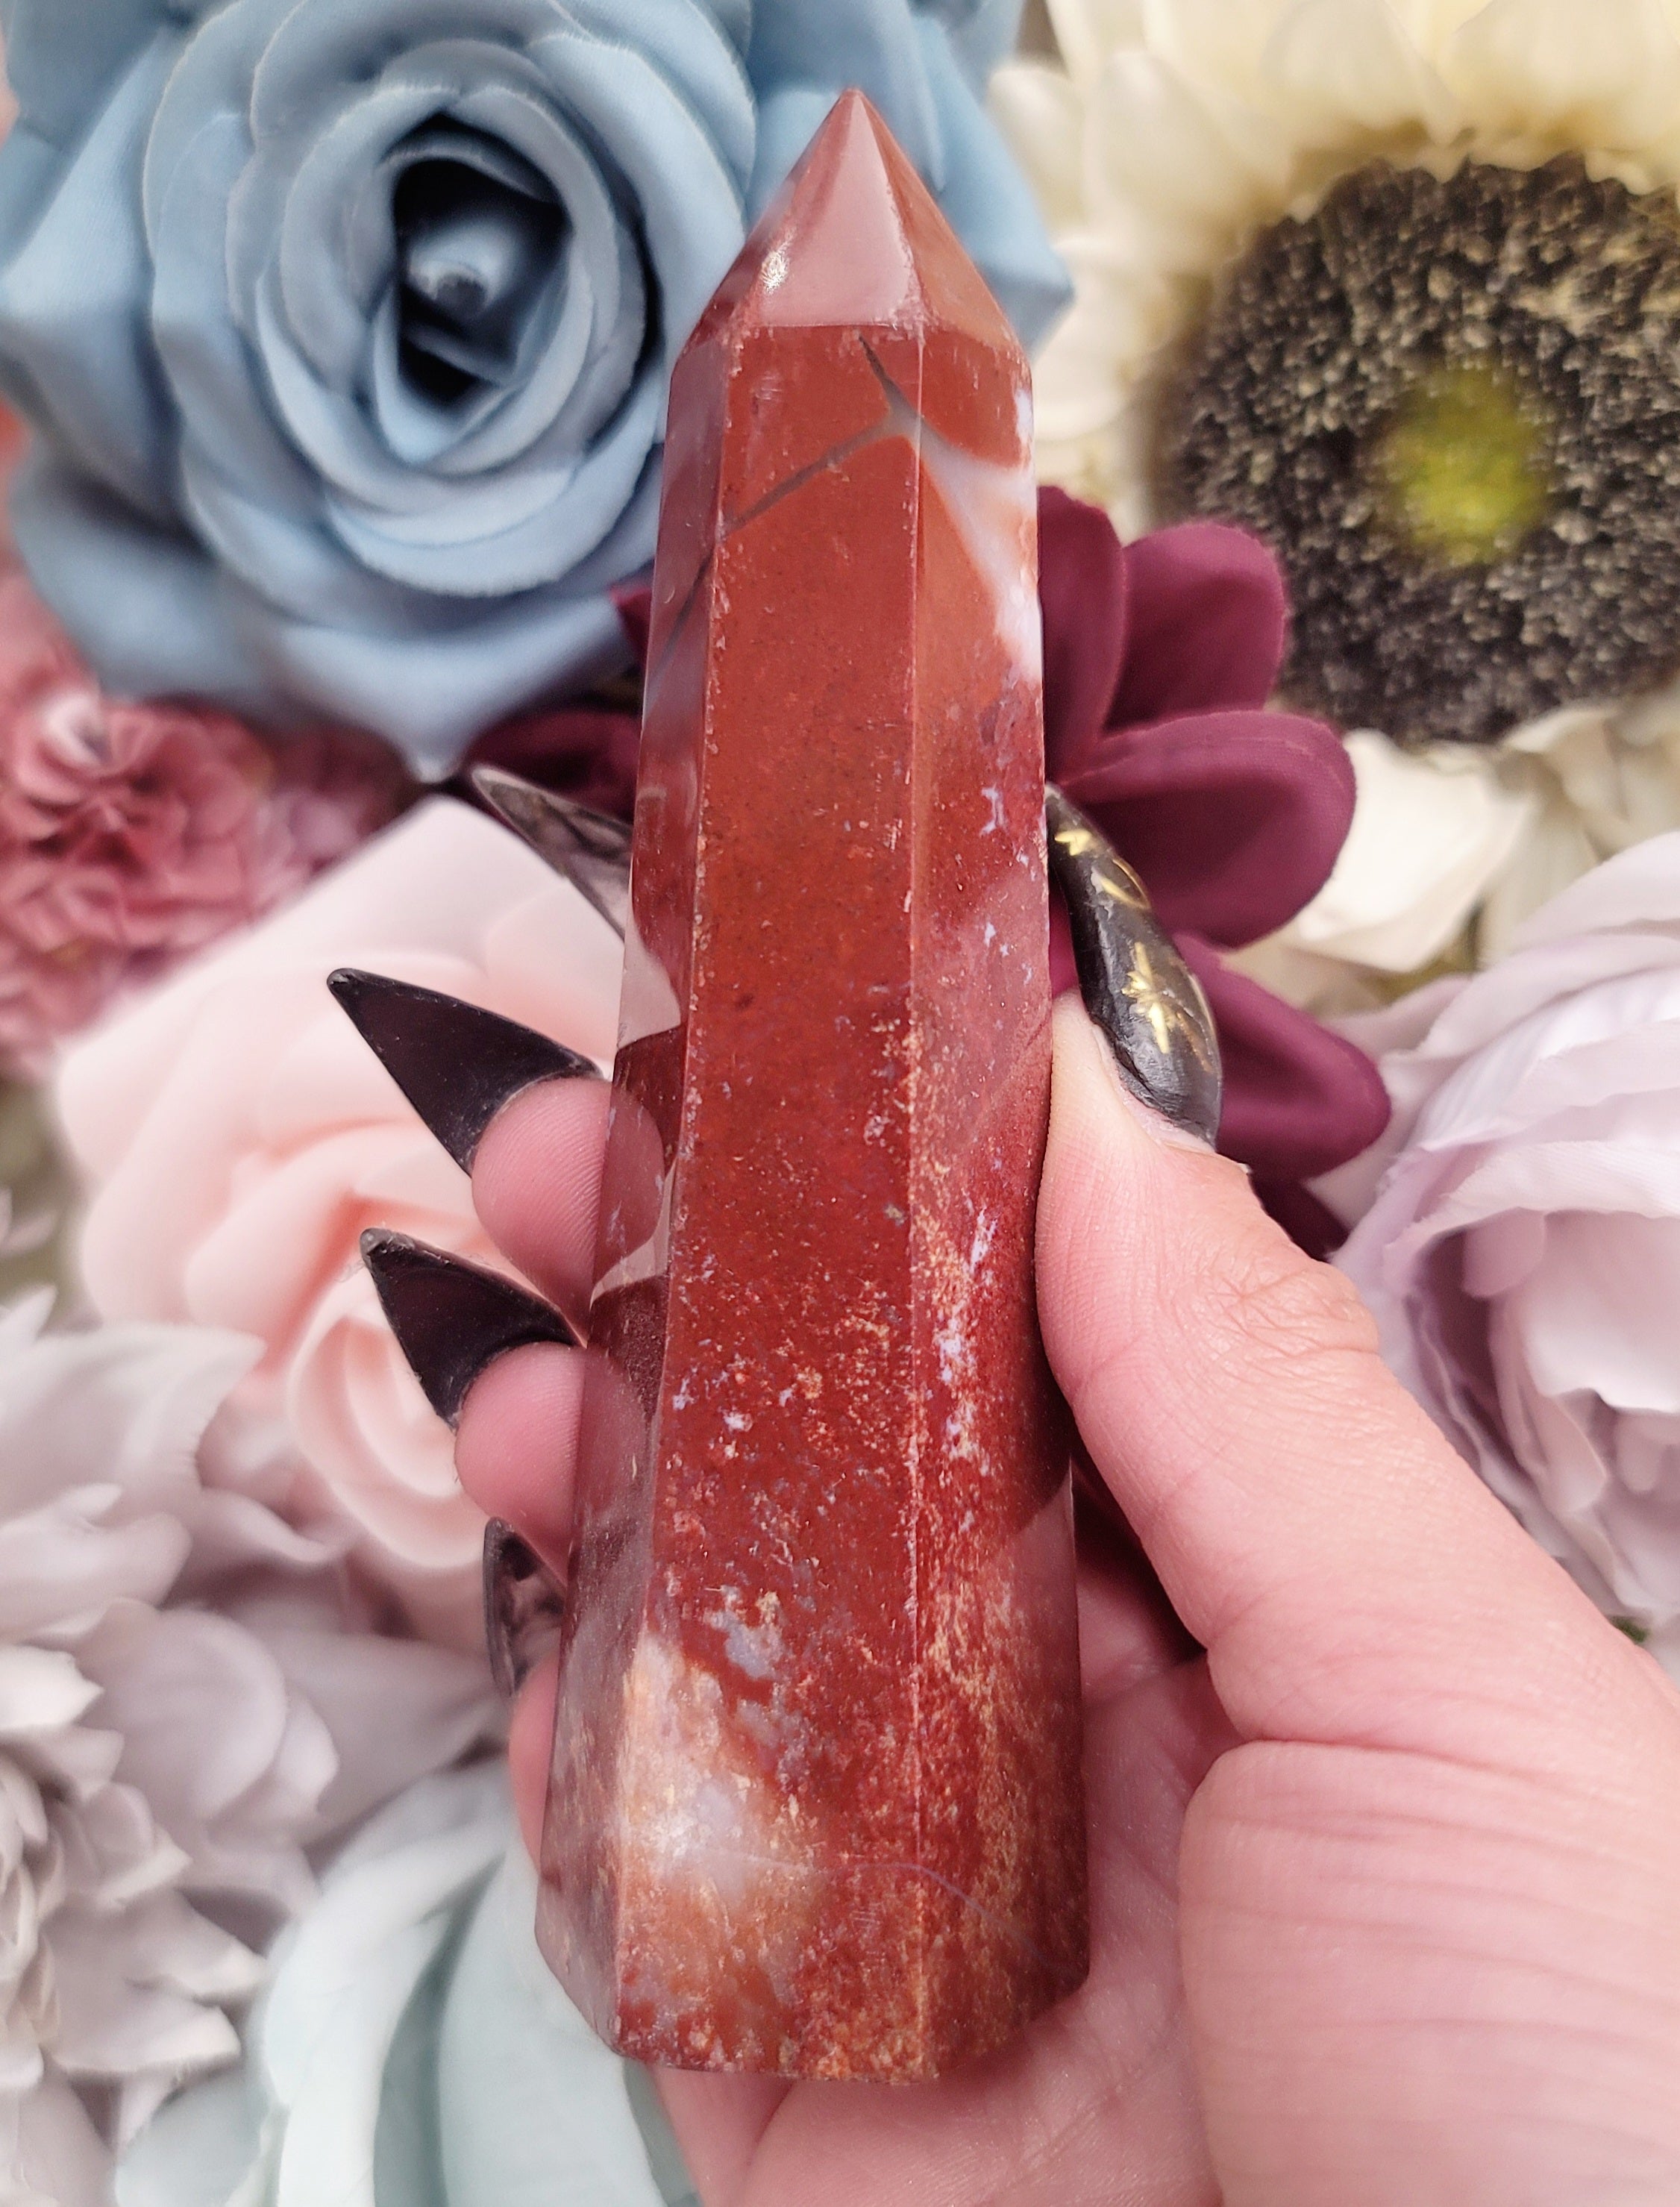 Red Moss Agate Point for Manifestation of Wealth & Speed of Results.